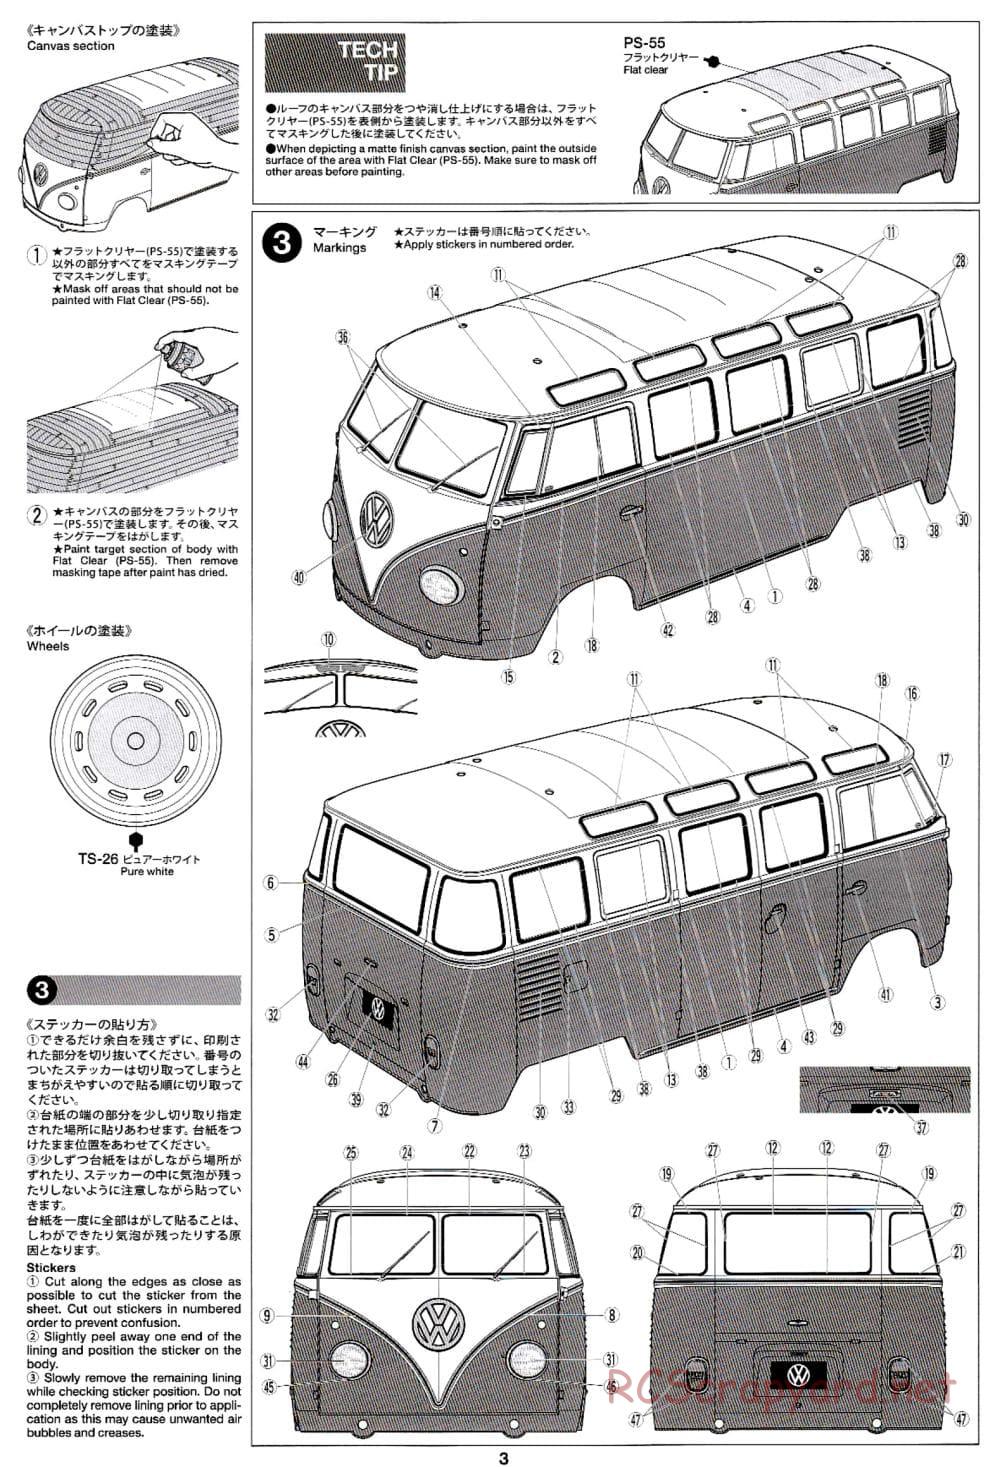 Tamiya - Volkswagen Type 2 (T1) - M-06 Chassis - Body Manual - Page 3